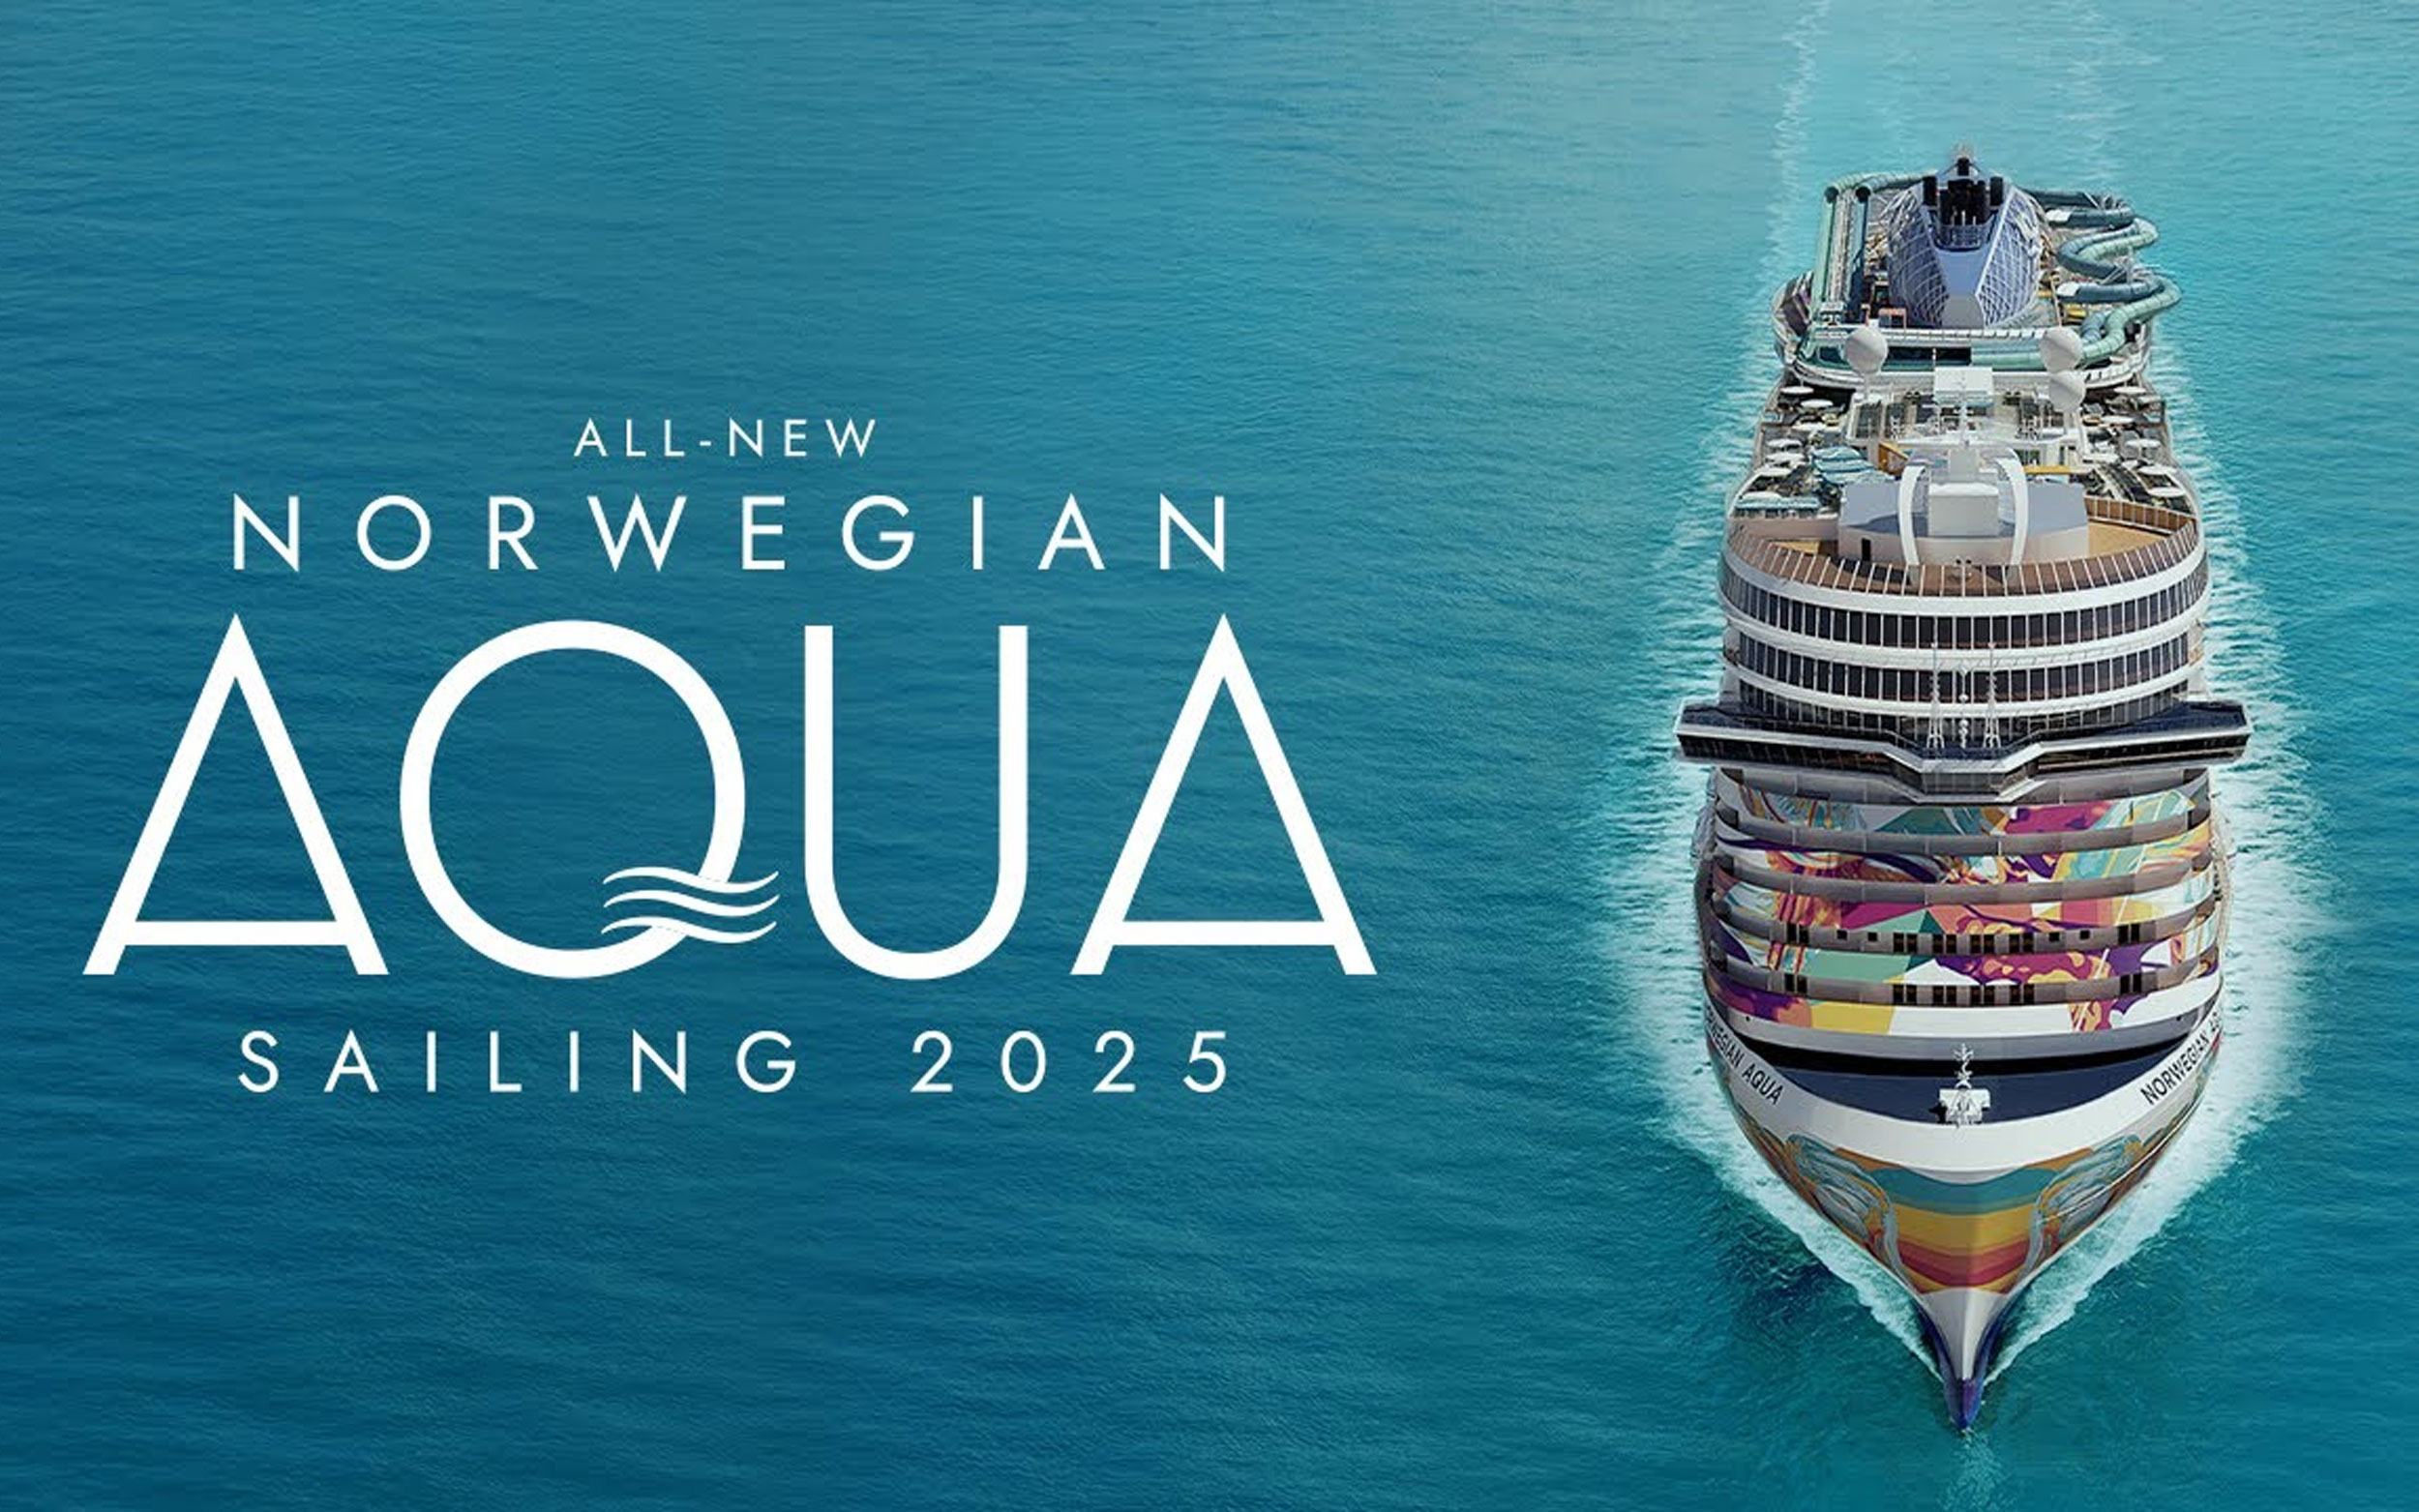 Get a first look at Norwegian Aqua, the first vessel in the expanded Prima Plus Class with exhilarating new attractions and elevated spaces, setting sail April 2025.